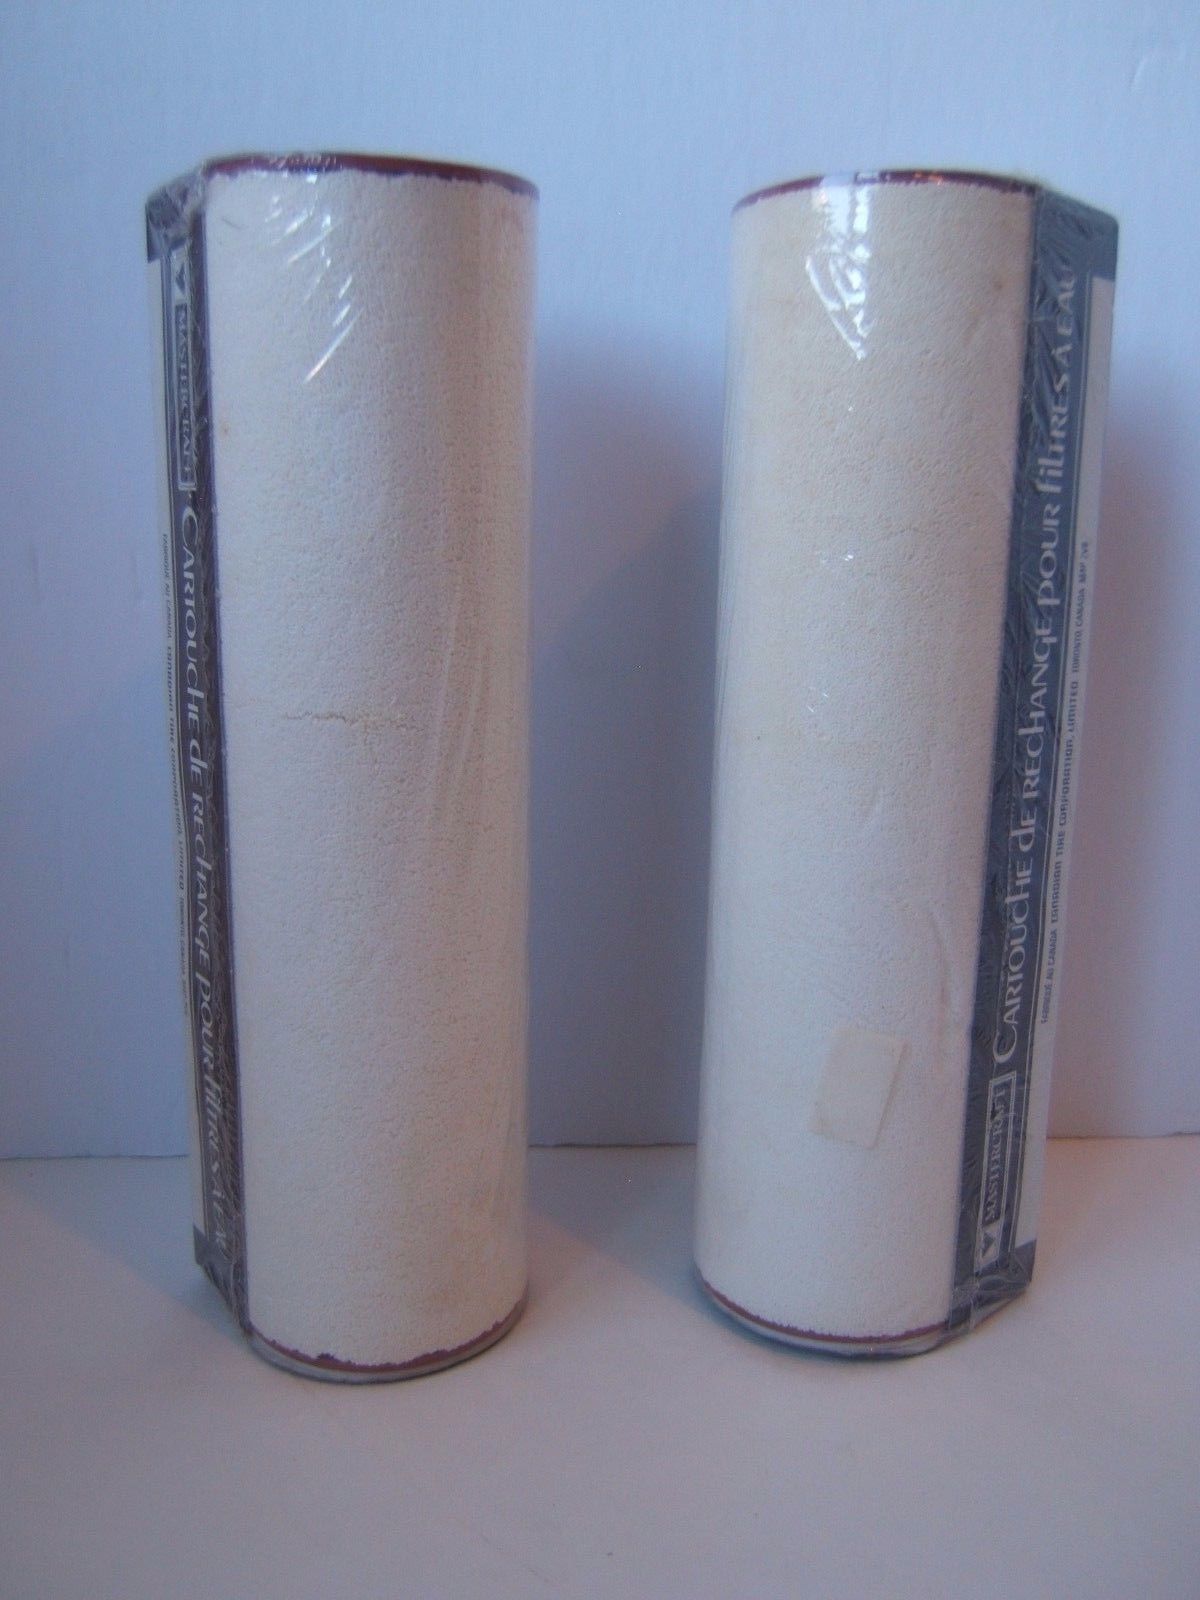 CF3 Heavy Duty Sediment Rust 2 Sealed Mastercraft Replacement Water Filters NOS - $23.05